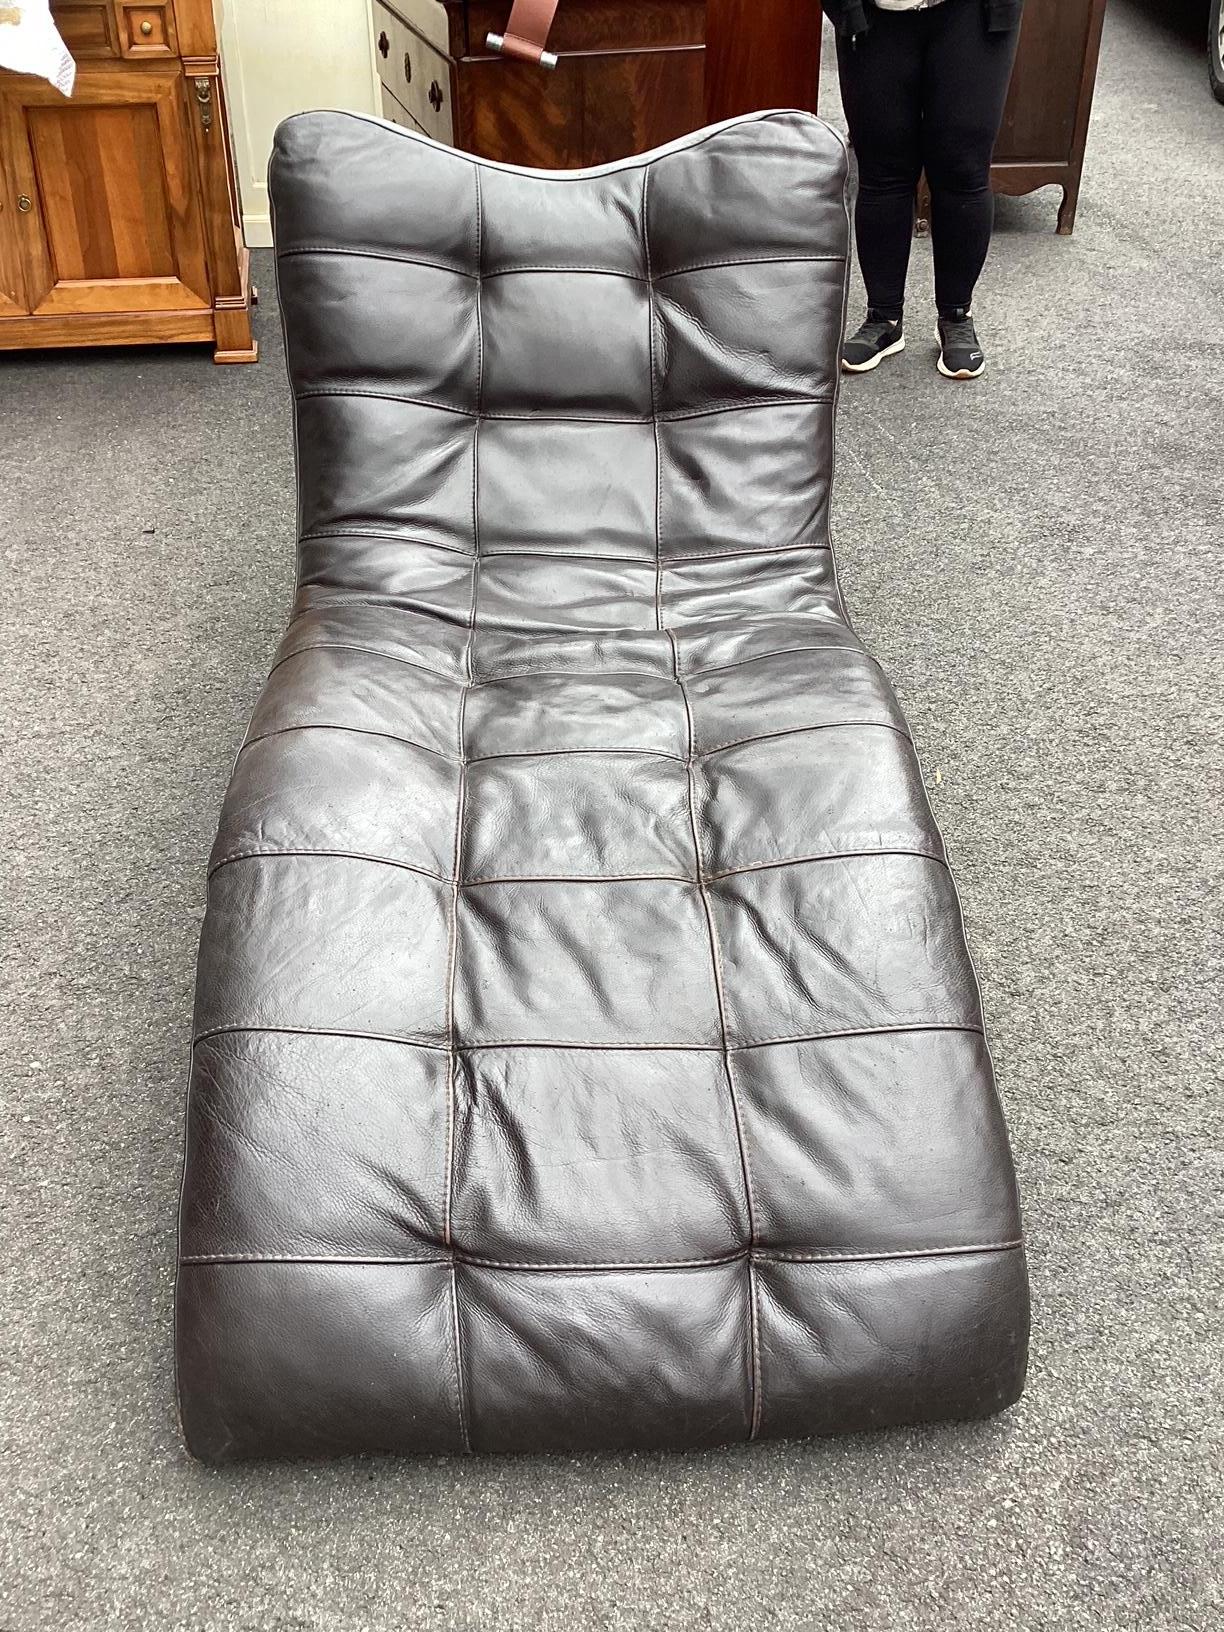 Modern Sizzling Hot Vintage Italian Leather Chaise Longue For Sale